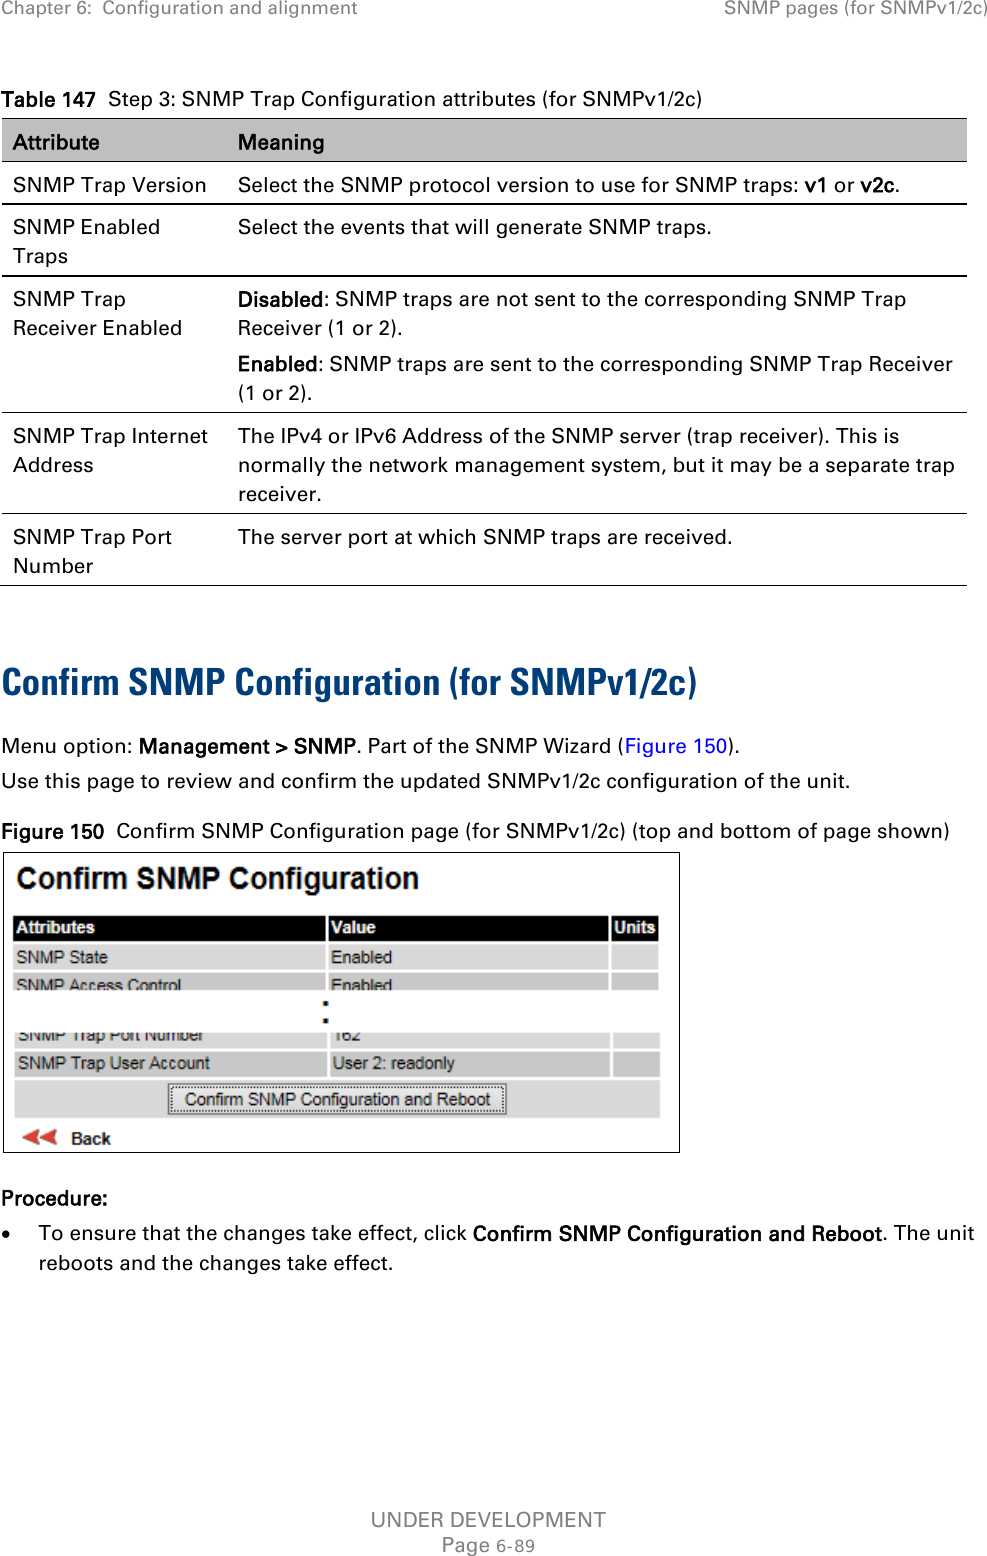 Chapter 6:  Configuration and alignment SNMP pages (for SNMPv1/2c)  Table 147  Step 3: SNMP Trap Configuration attributes (for SNMPv1/2c) Attribute Meaning SNMP Trap Version Select the SNMP protocol version to use for SNMP traps: v1 or v2c. SNMP Enabled Traps Select the events that will generate SNMP traps. SNMP Trap Receiver Enabled Disabled: SNMP traps are not sent to the corresponding SNMP Trap Receiver (1 or 2). Enabled: SNMP traps are sent to the corresponding SNMP Trap Receiver (1 or 2). SNMP Trap Internet Address The IPv4 or IPv6 Address of the SNMP server (trap receiver). This is normally the network management system, but it may be a separate trap receiver. SNMP Trap Port Number The server port at which SNMP traps are received.  Confirm SNMP Configuration (for SNMPv1/2c)  Menu option: Management &gt; SNMP. Part of the SNMP Wizard (Figure 150). Use this page to review and confirm the updated SNMPv1/2c configuration of the unit. Figure 150  Confirm SNMP Configuration page (for SNMPv1/2c) (top and bottom of page shown)  Procedure: • To ensure that the changes take effect, click Confirm SNMP Configuration and Reboot. The unit reboots and the changes take effect.  UNDER DEVELOPMENT Page 6-89 